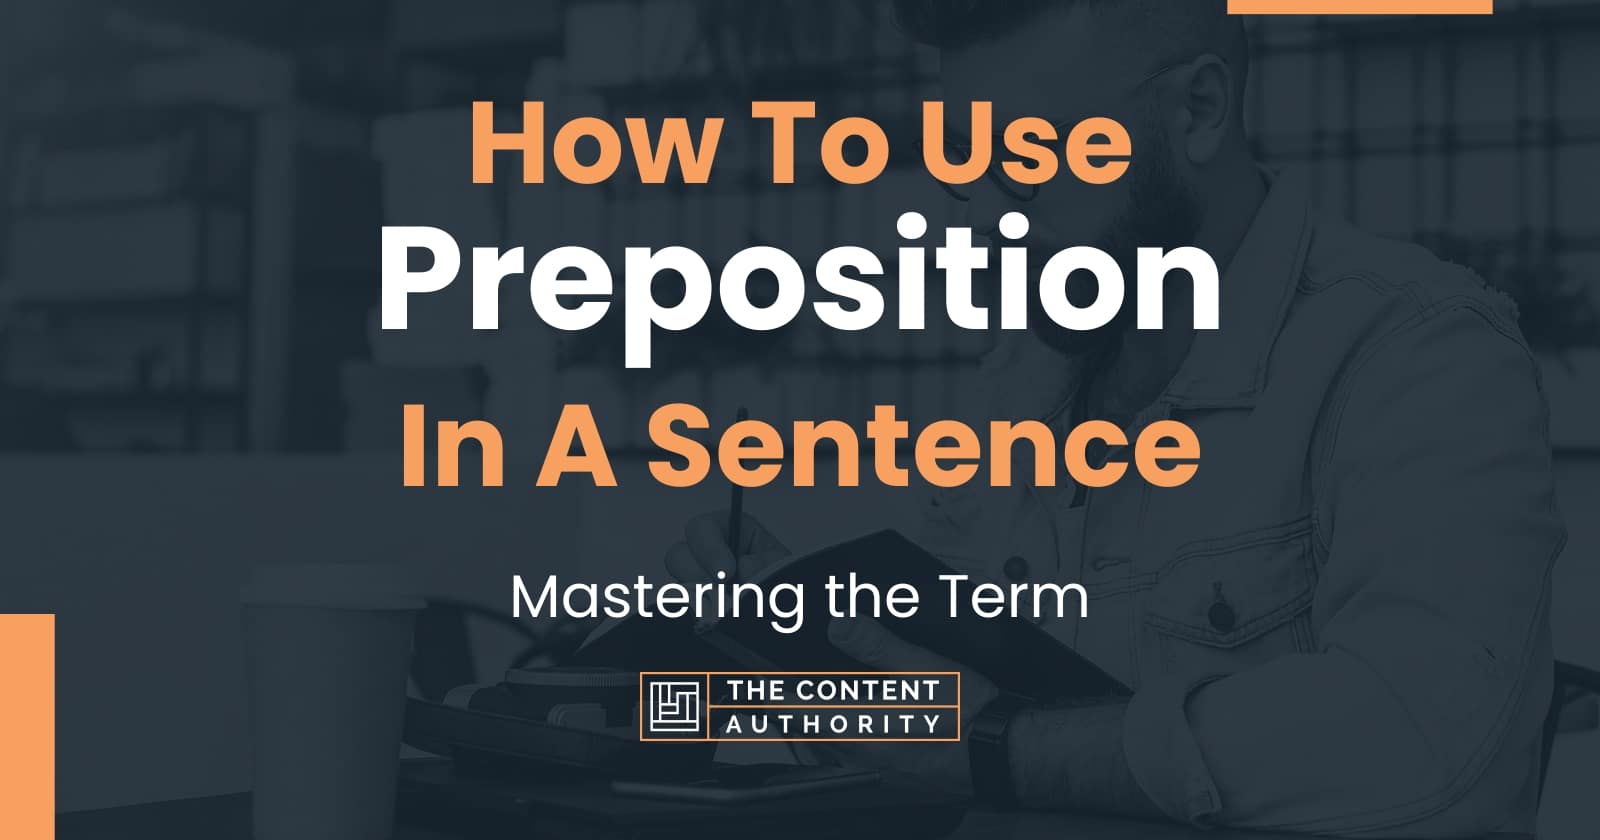 how-to-use-preposition-in-a-sentence-mastering-the-term